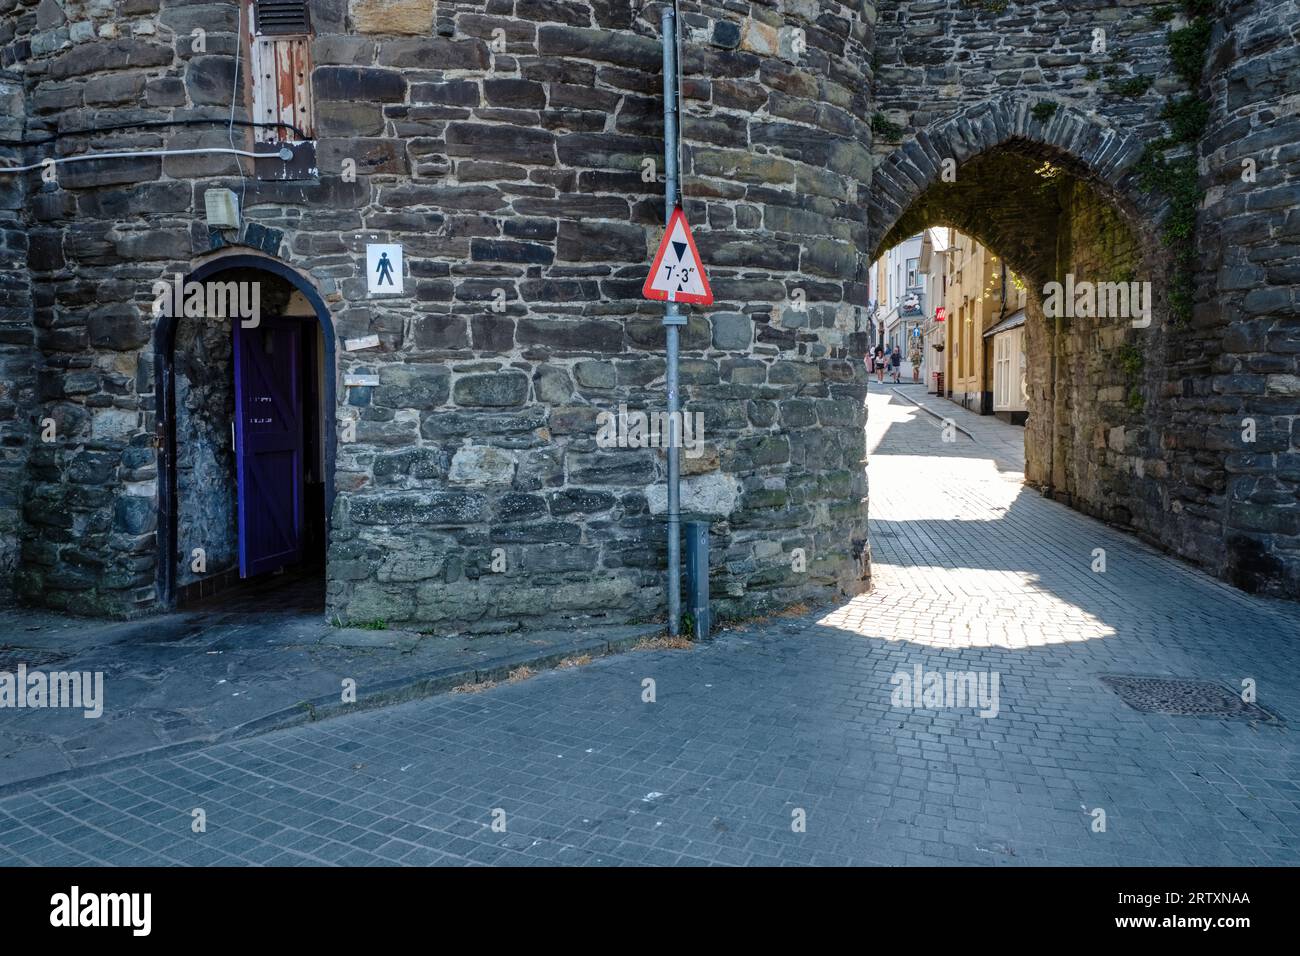 A public toilet in the old town walls, Conwy, Clwyd, Wales Stock Photo